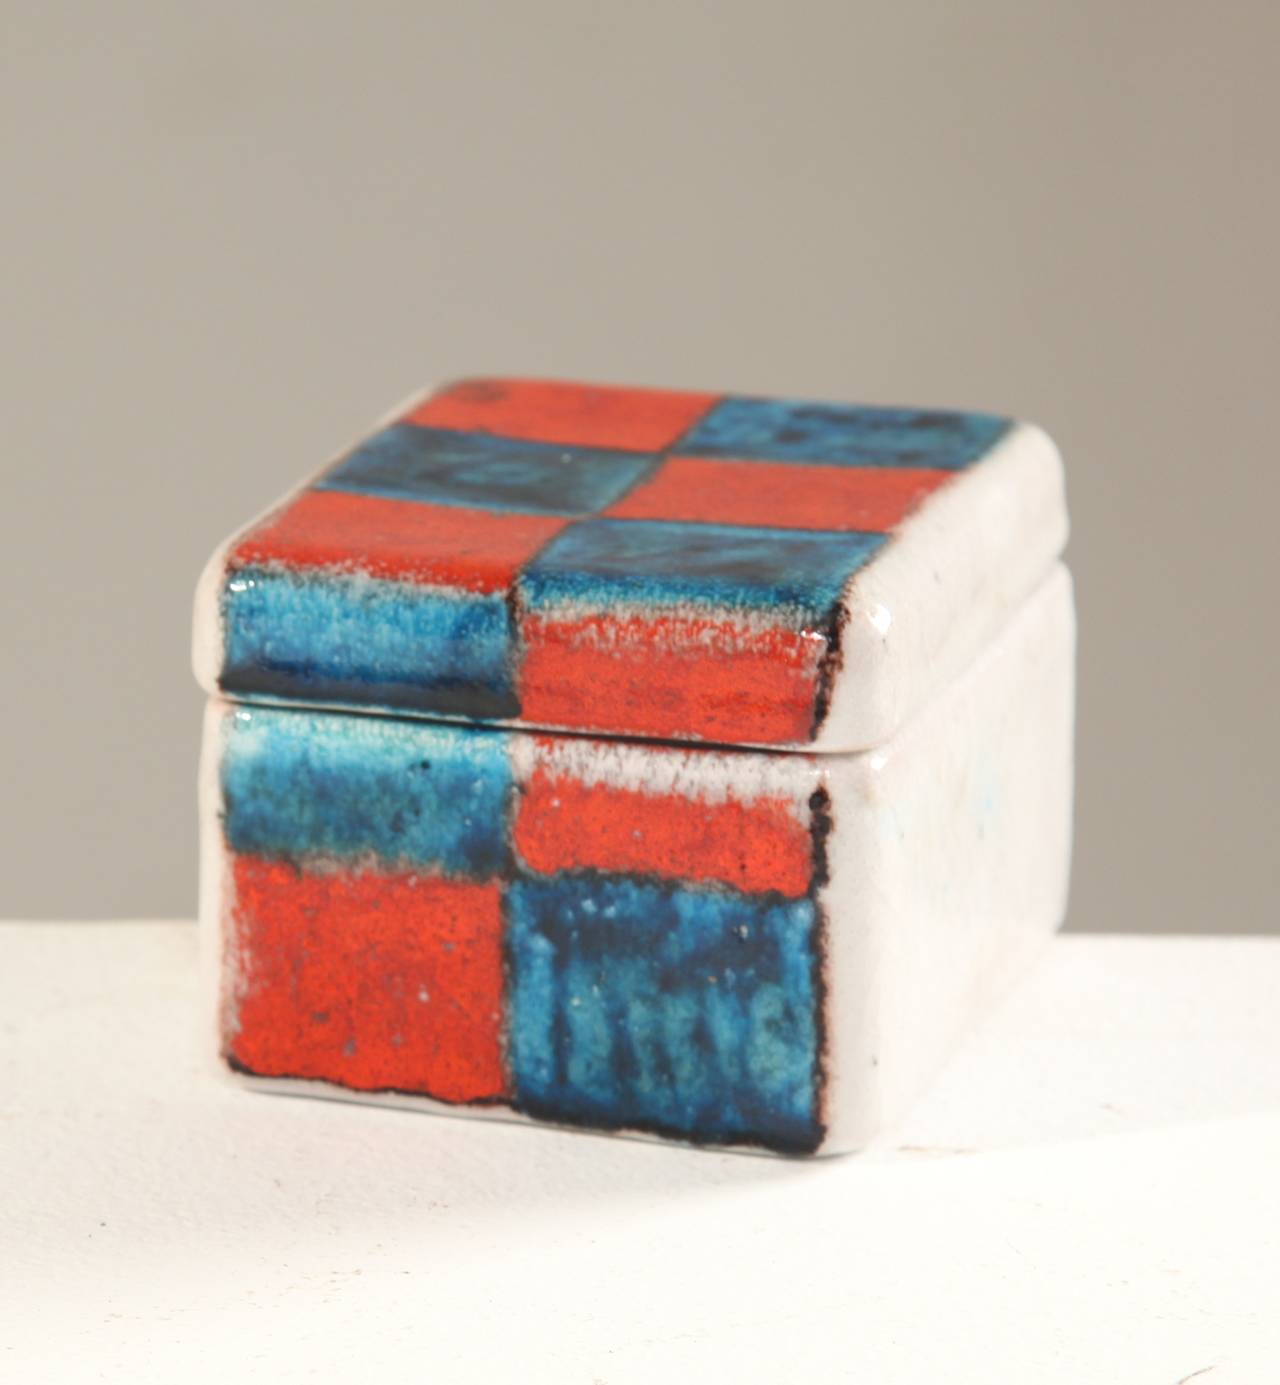 A small ceramic box with lid by Italian ceramist Guido Gambone. The box is white with an orange and blue pattern.
In a perfect condition and signed by Gambone.